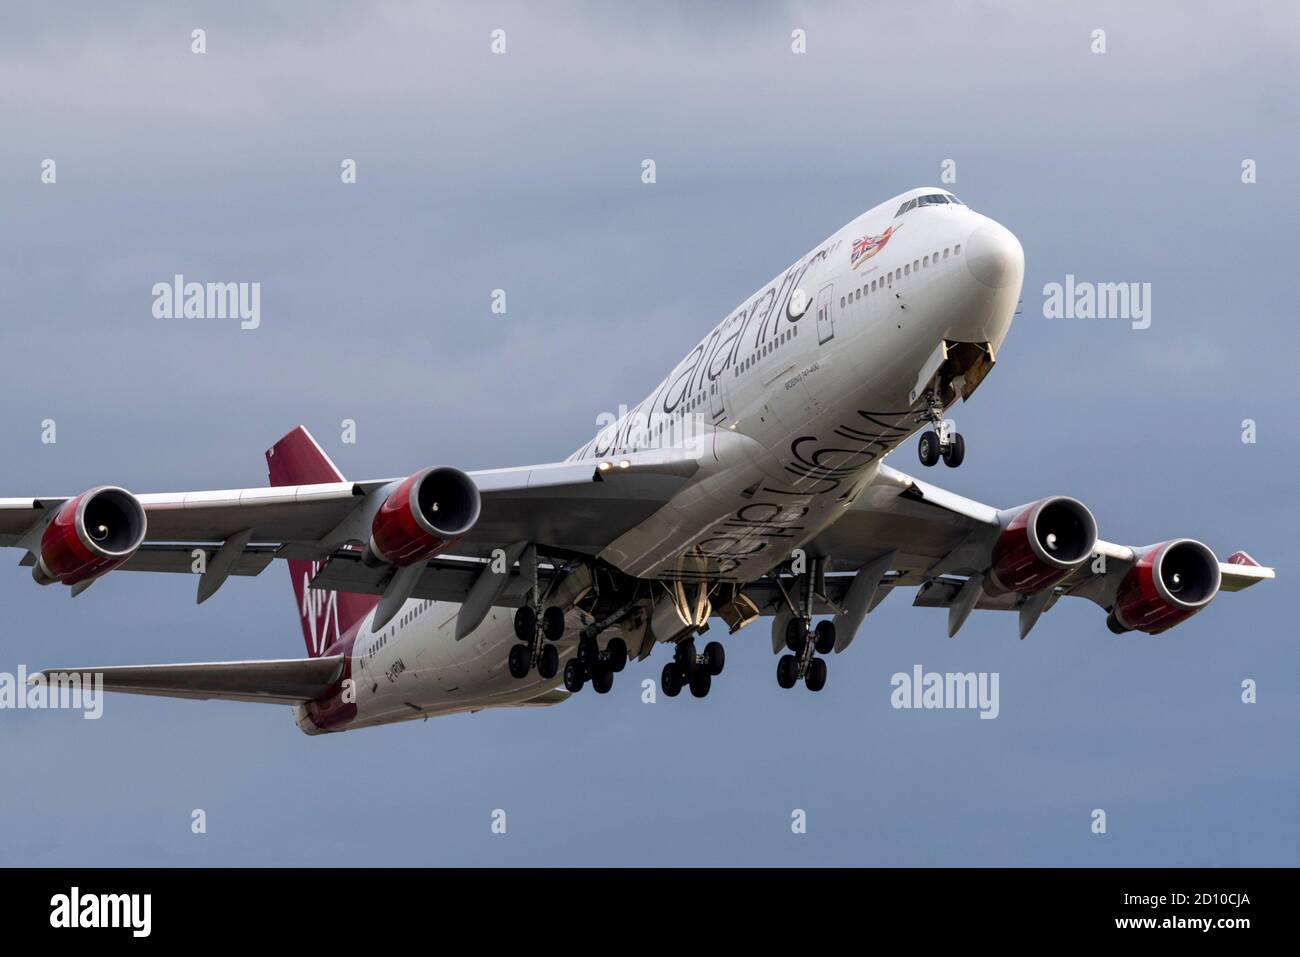 Virgin Atlantic Boeing 747 Jumbo Jet plane taking off from London Heathrow Airport, UK, after being stored. Premature retirement due to COVID19. Sold Stock Photo